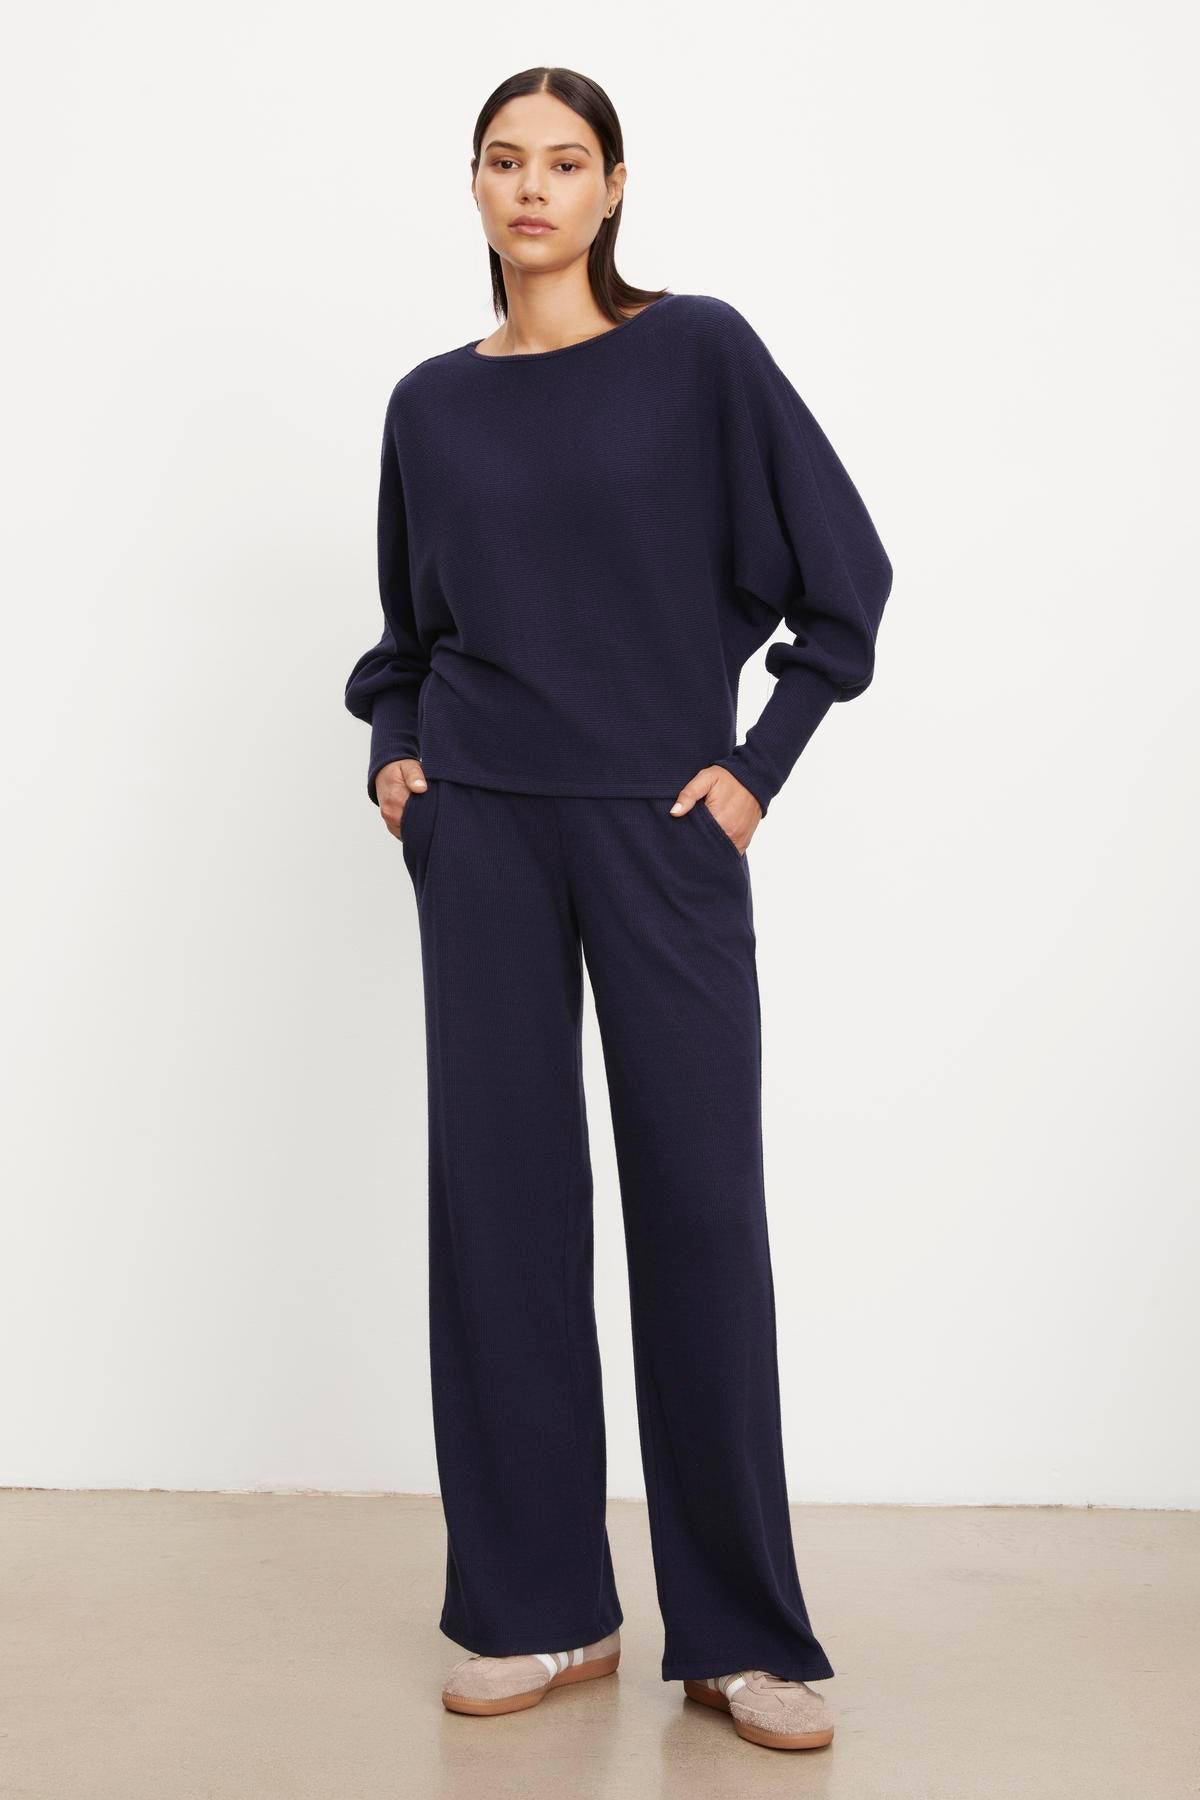 The model is wearing a Velvet by Graham & Spencer navy sweater and wide leg pants.-35702094692545